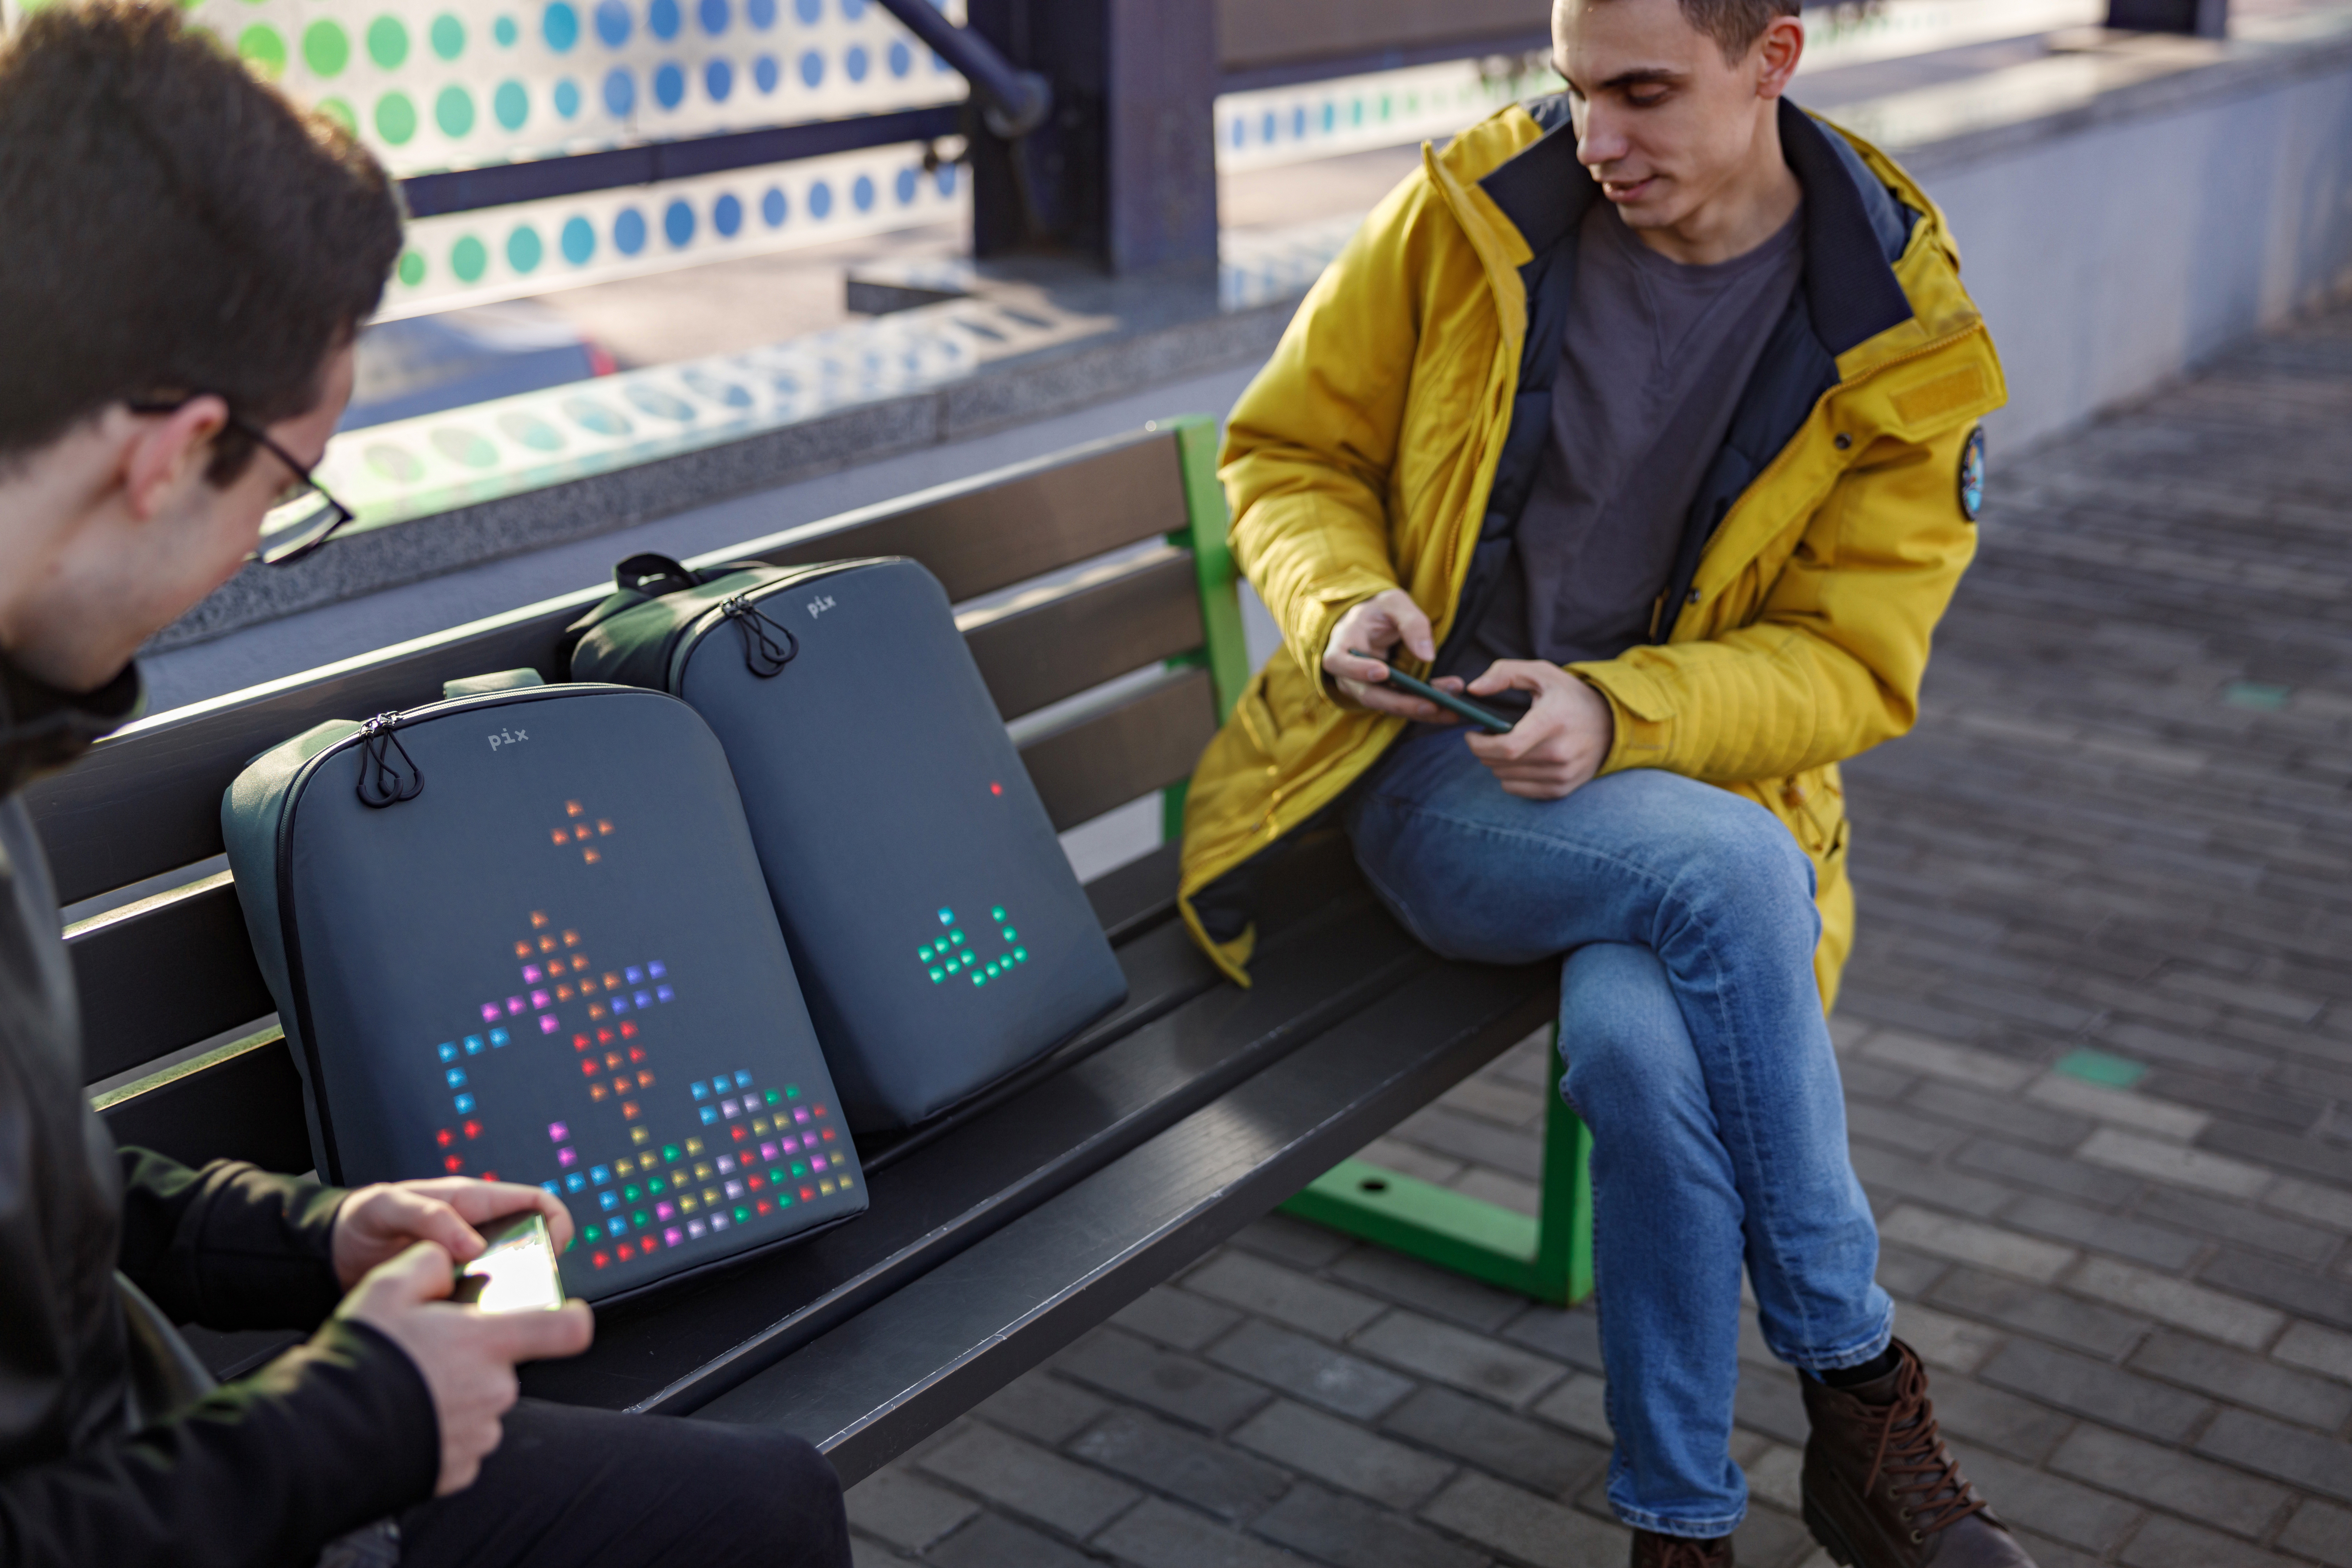 Play games while waiting for the bus